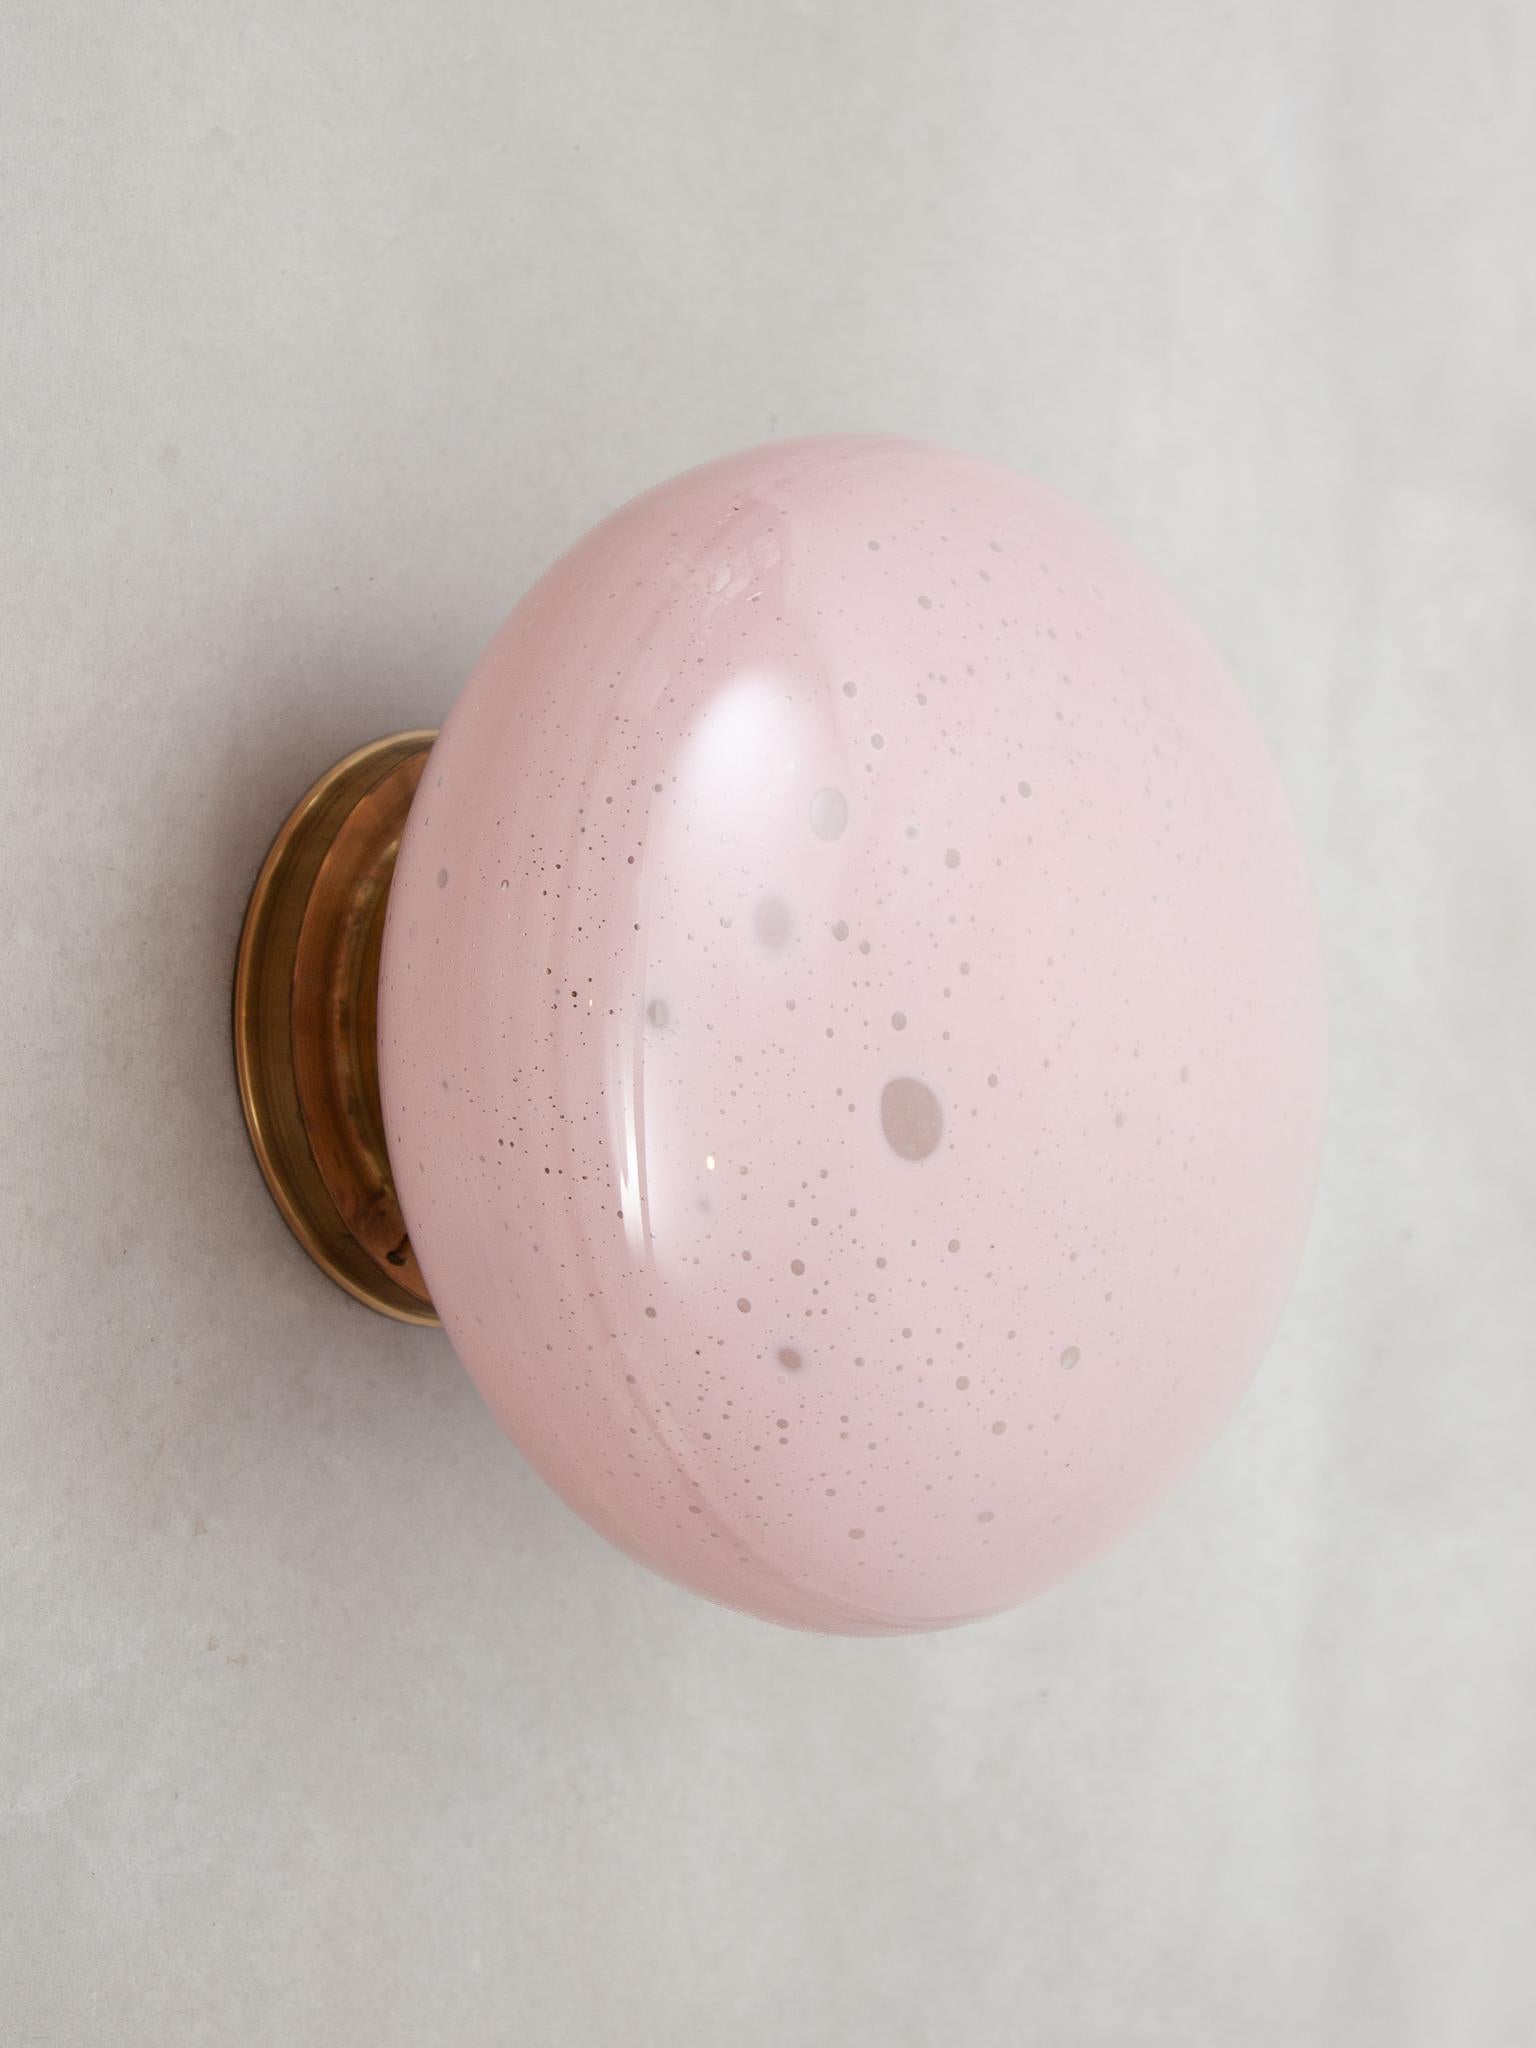 Hand-Crafted Alfredo Barbini Murano Ceiling Light 1970S Pink Opal Glass, Brass Frame For Sale